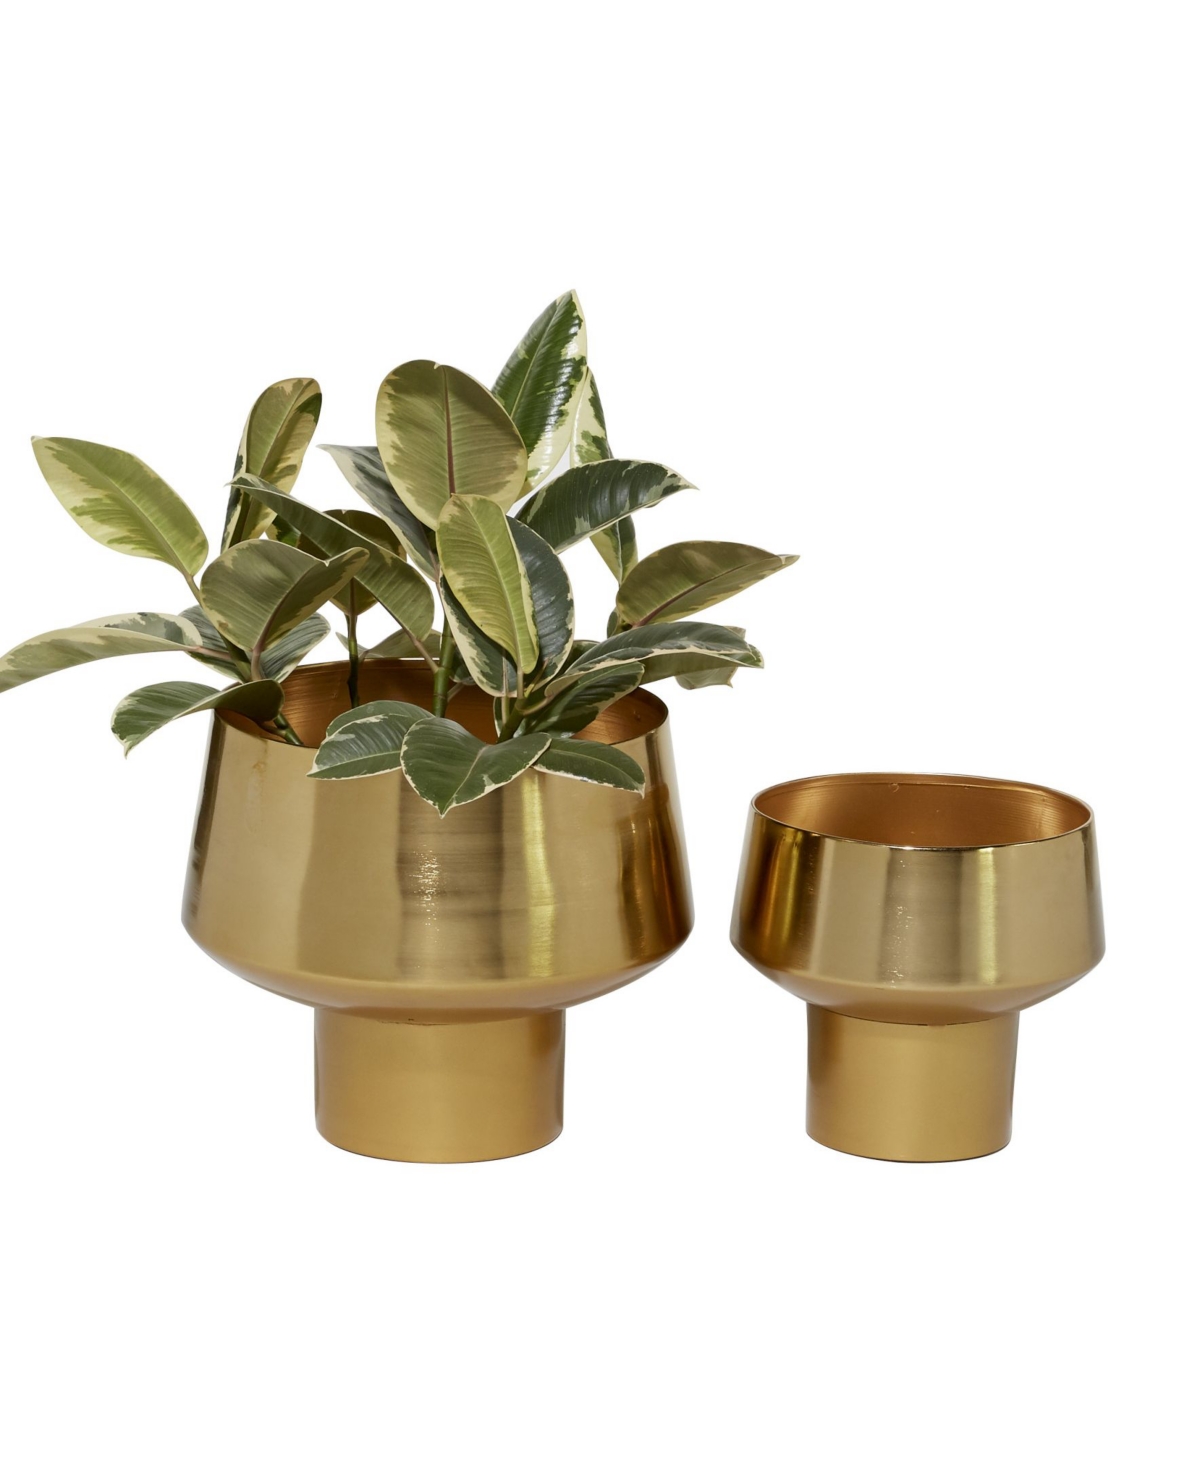 Decorative Metal Cup Shaped Planters with High Shine Finish, Set of 2 - Gold-tone